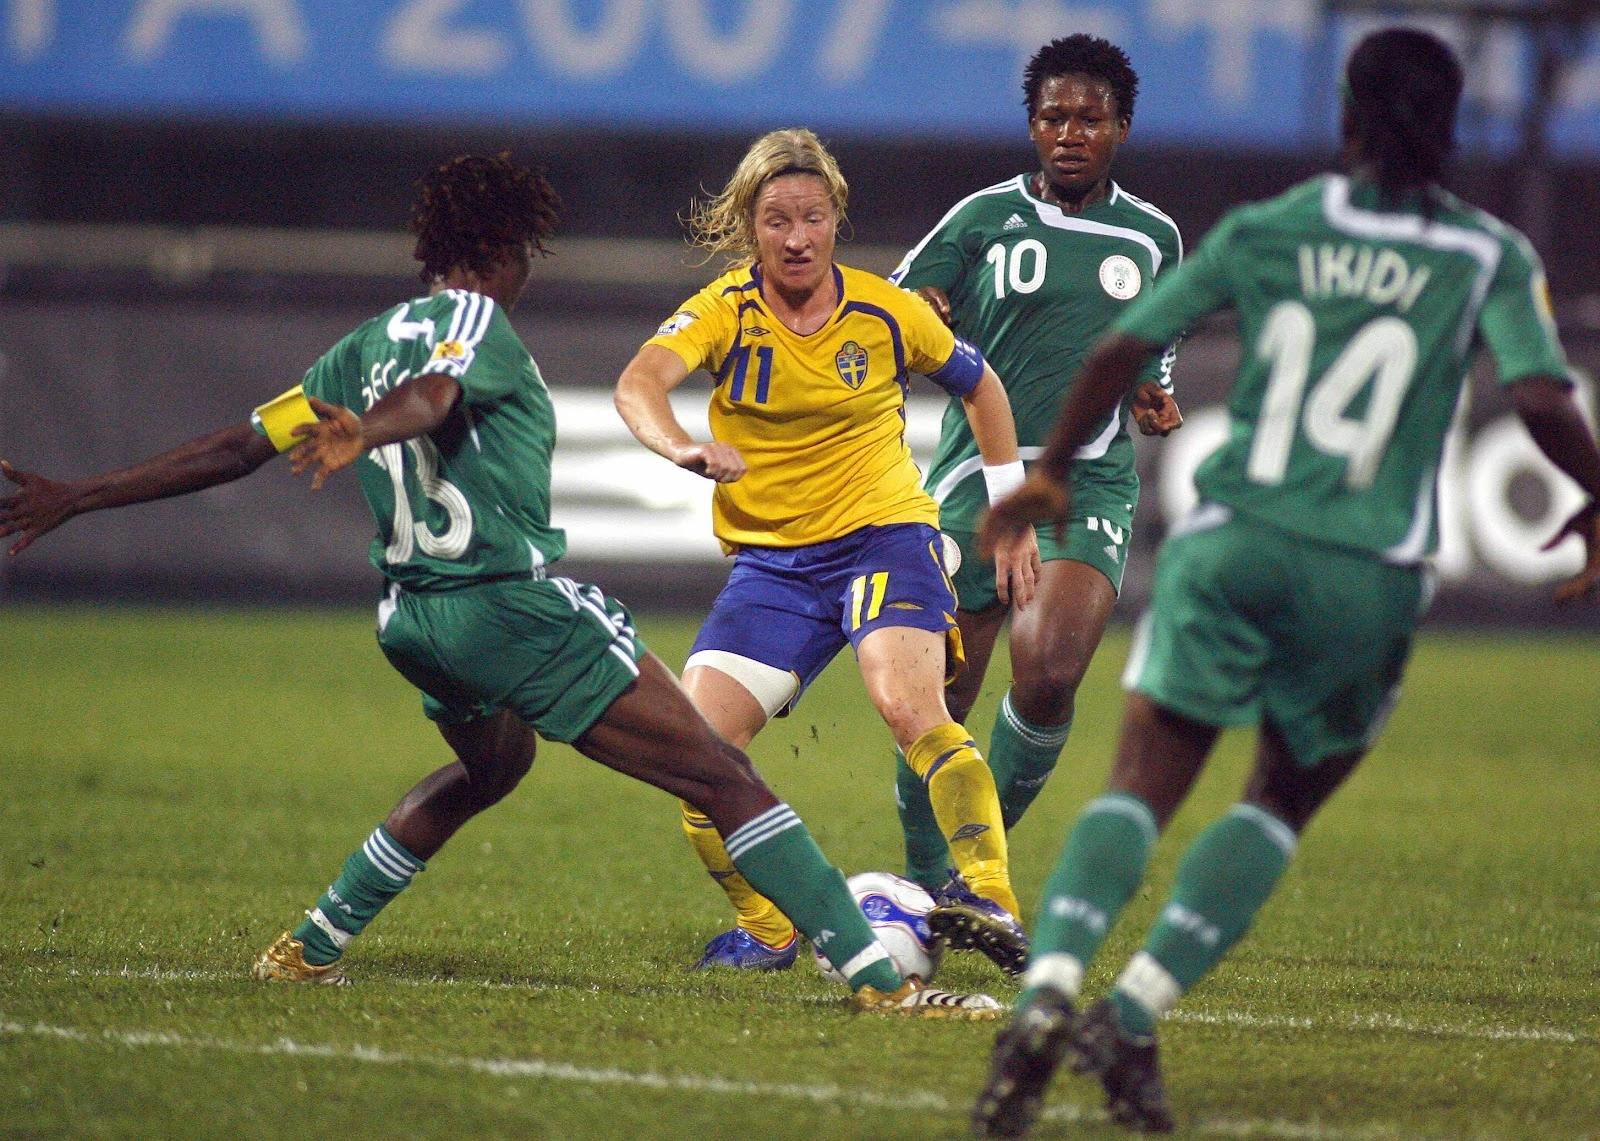 Sweden's Victoria Svensson fights for the ball with Nigerian players.